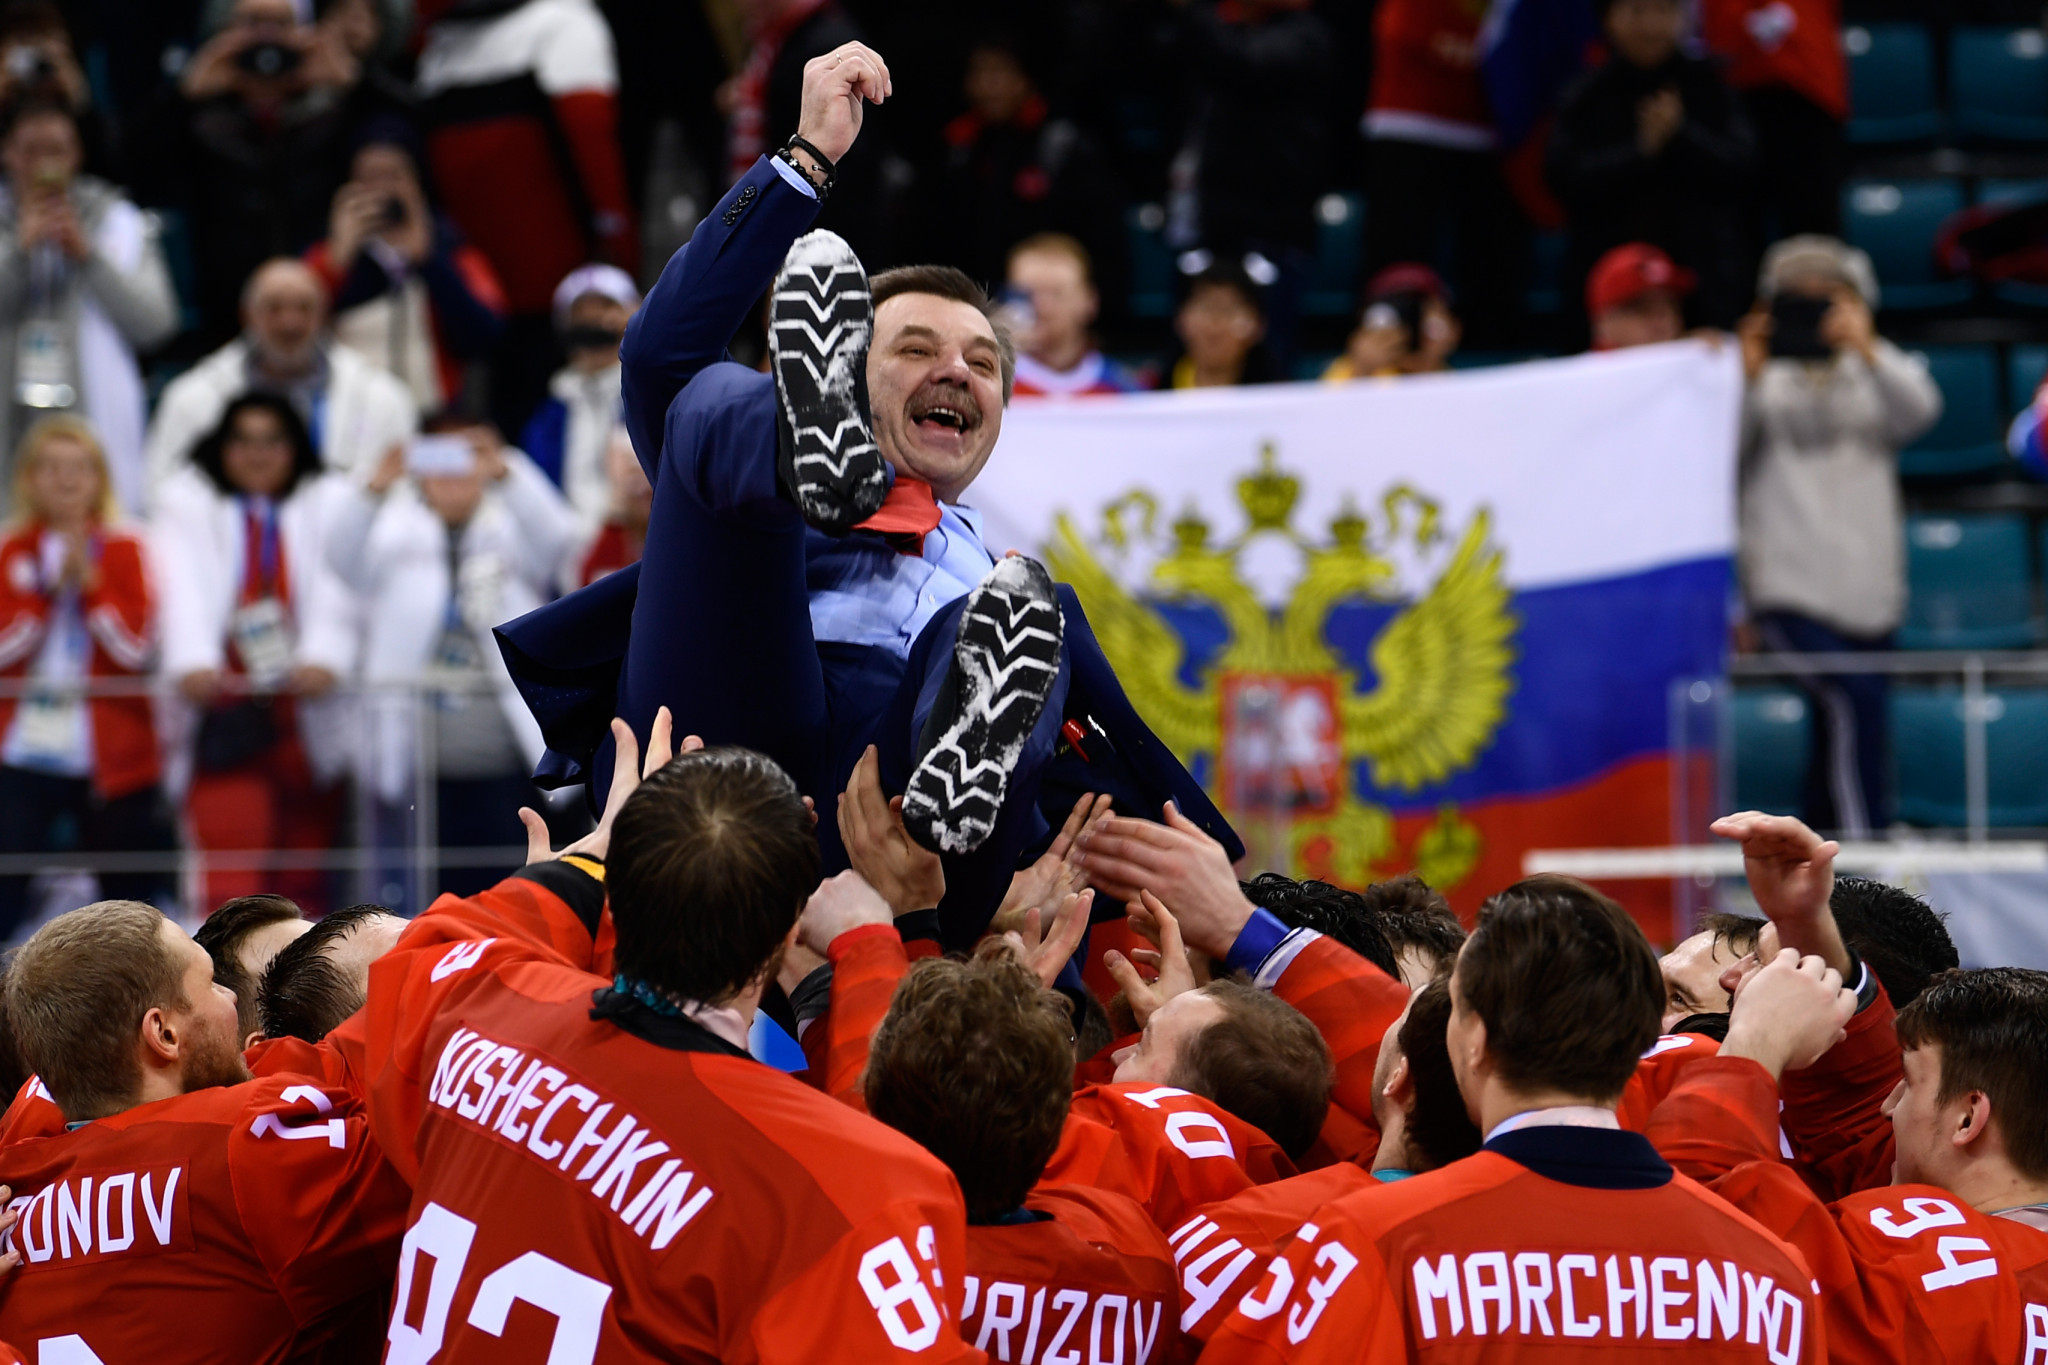 Oleg Znarok guided the Olympic Athletes from Russia to the men's ice hockey gold medal at Pyeongchang 2018 ©Getty Images